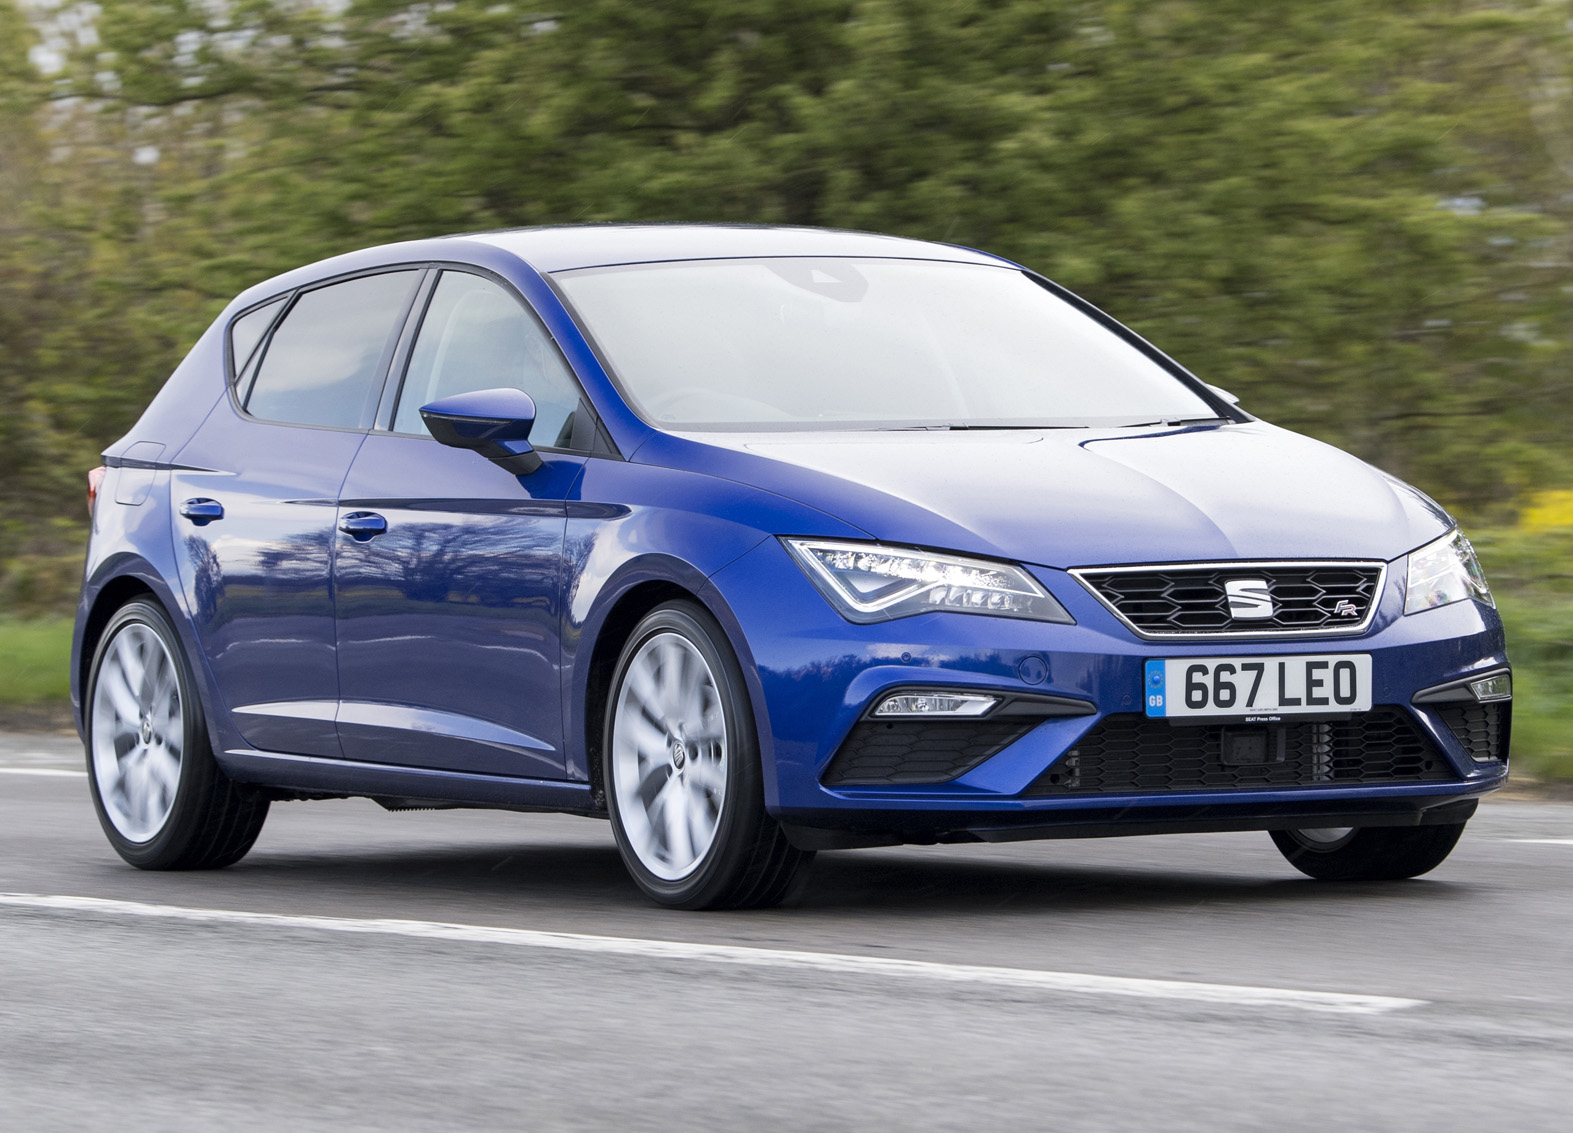 Seat Leon Mk3 review (2012-on)